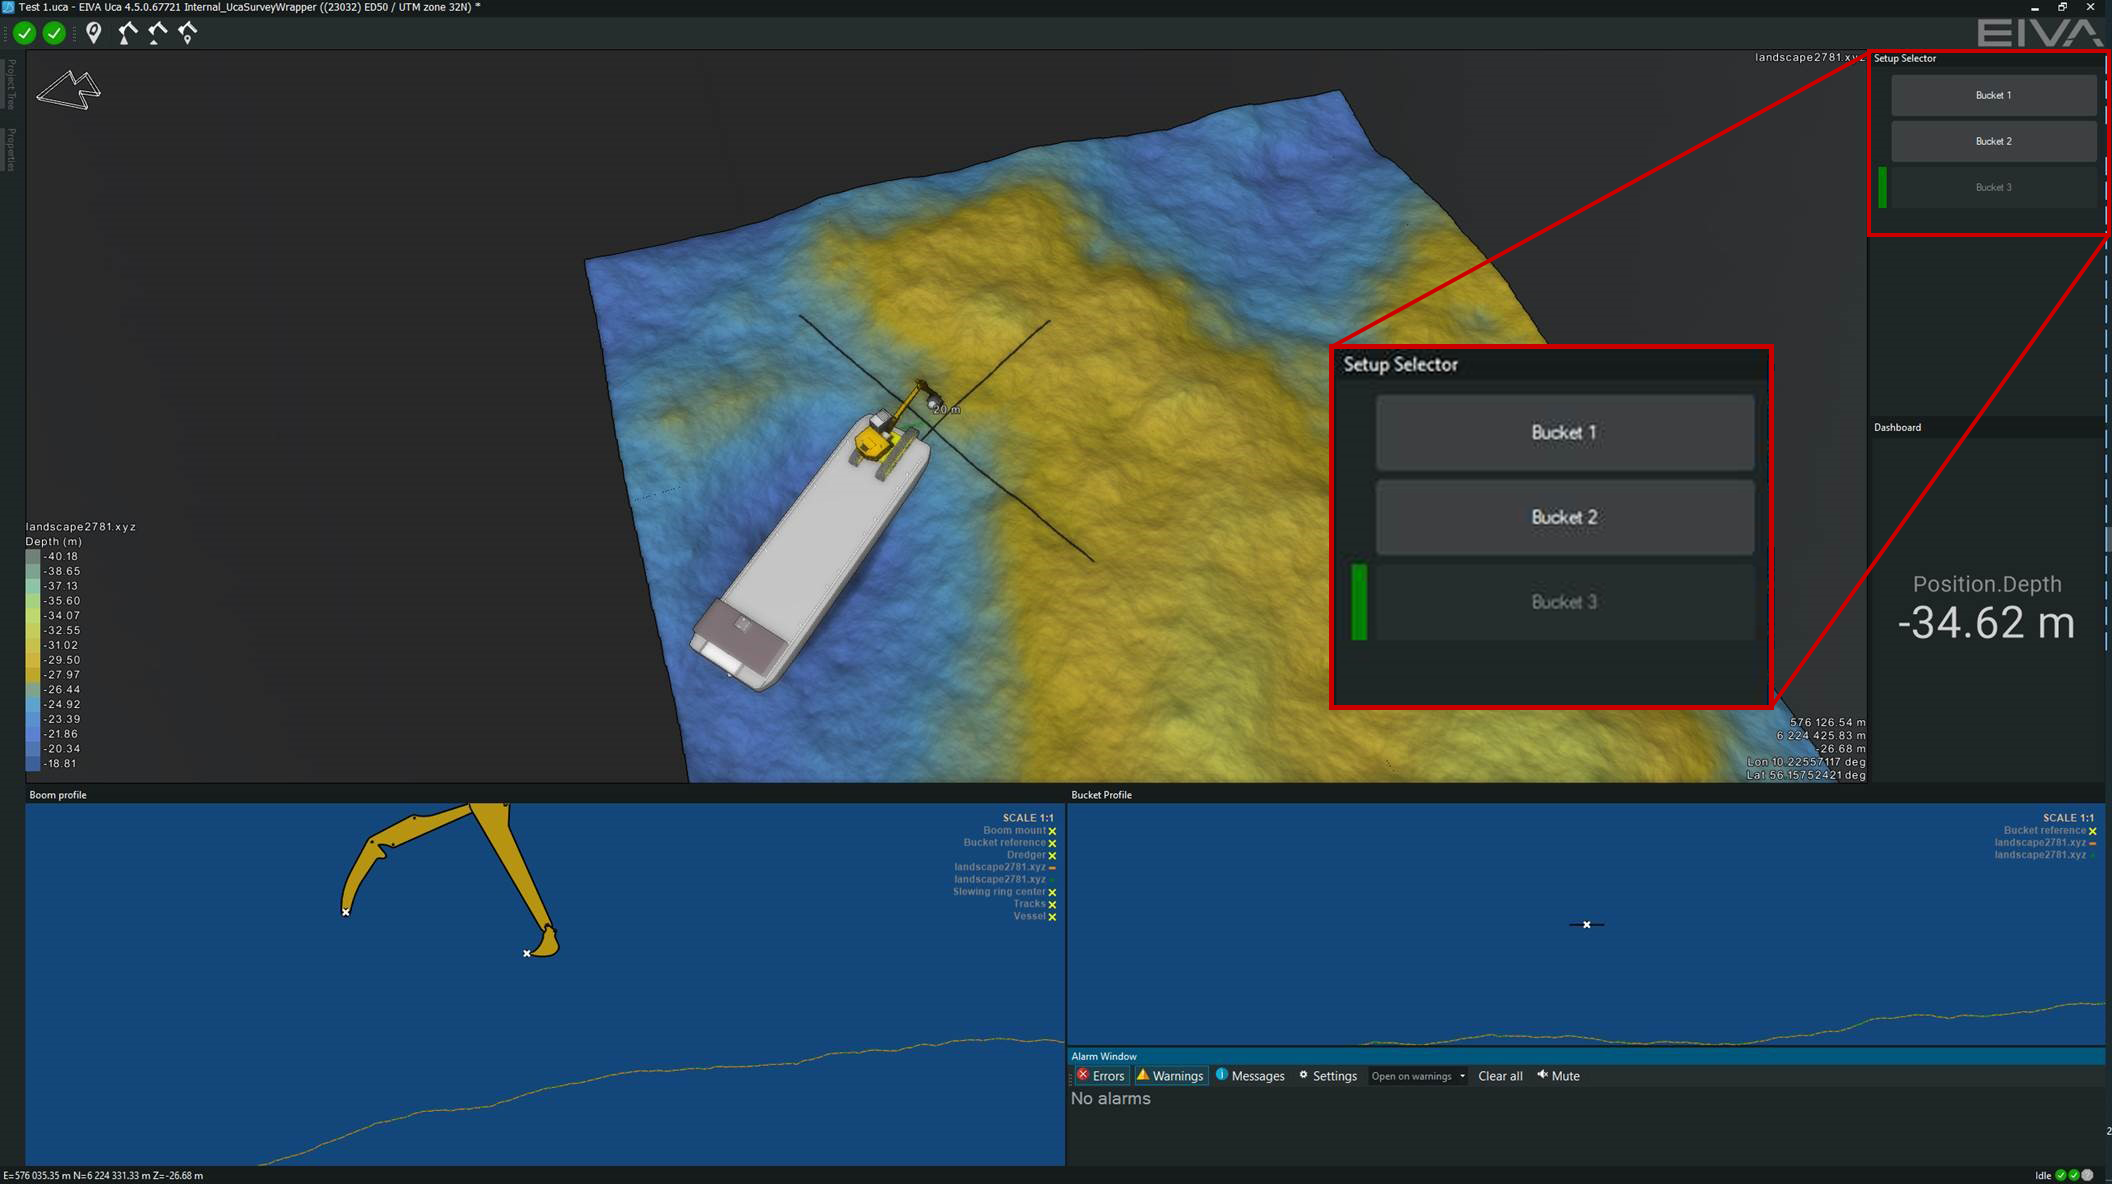 New features and enhancements in the latest update to NaviSuite Uca